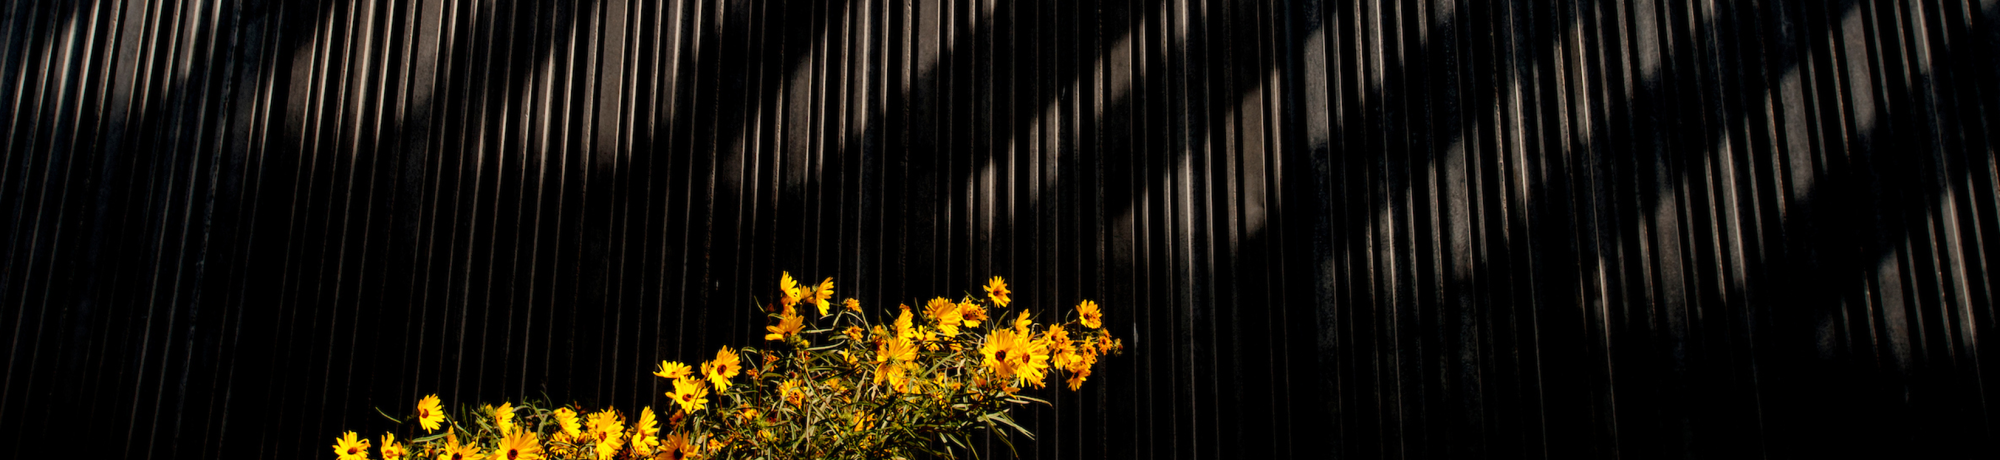 bright yellow flowers against a shadowed wall